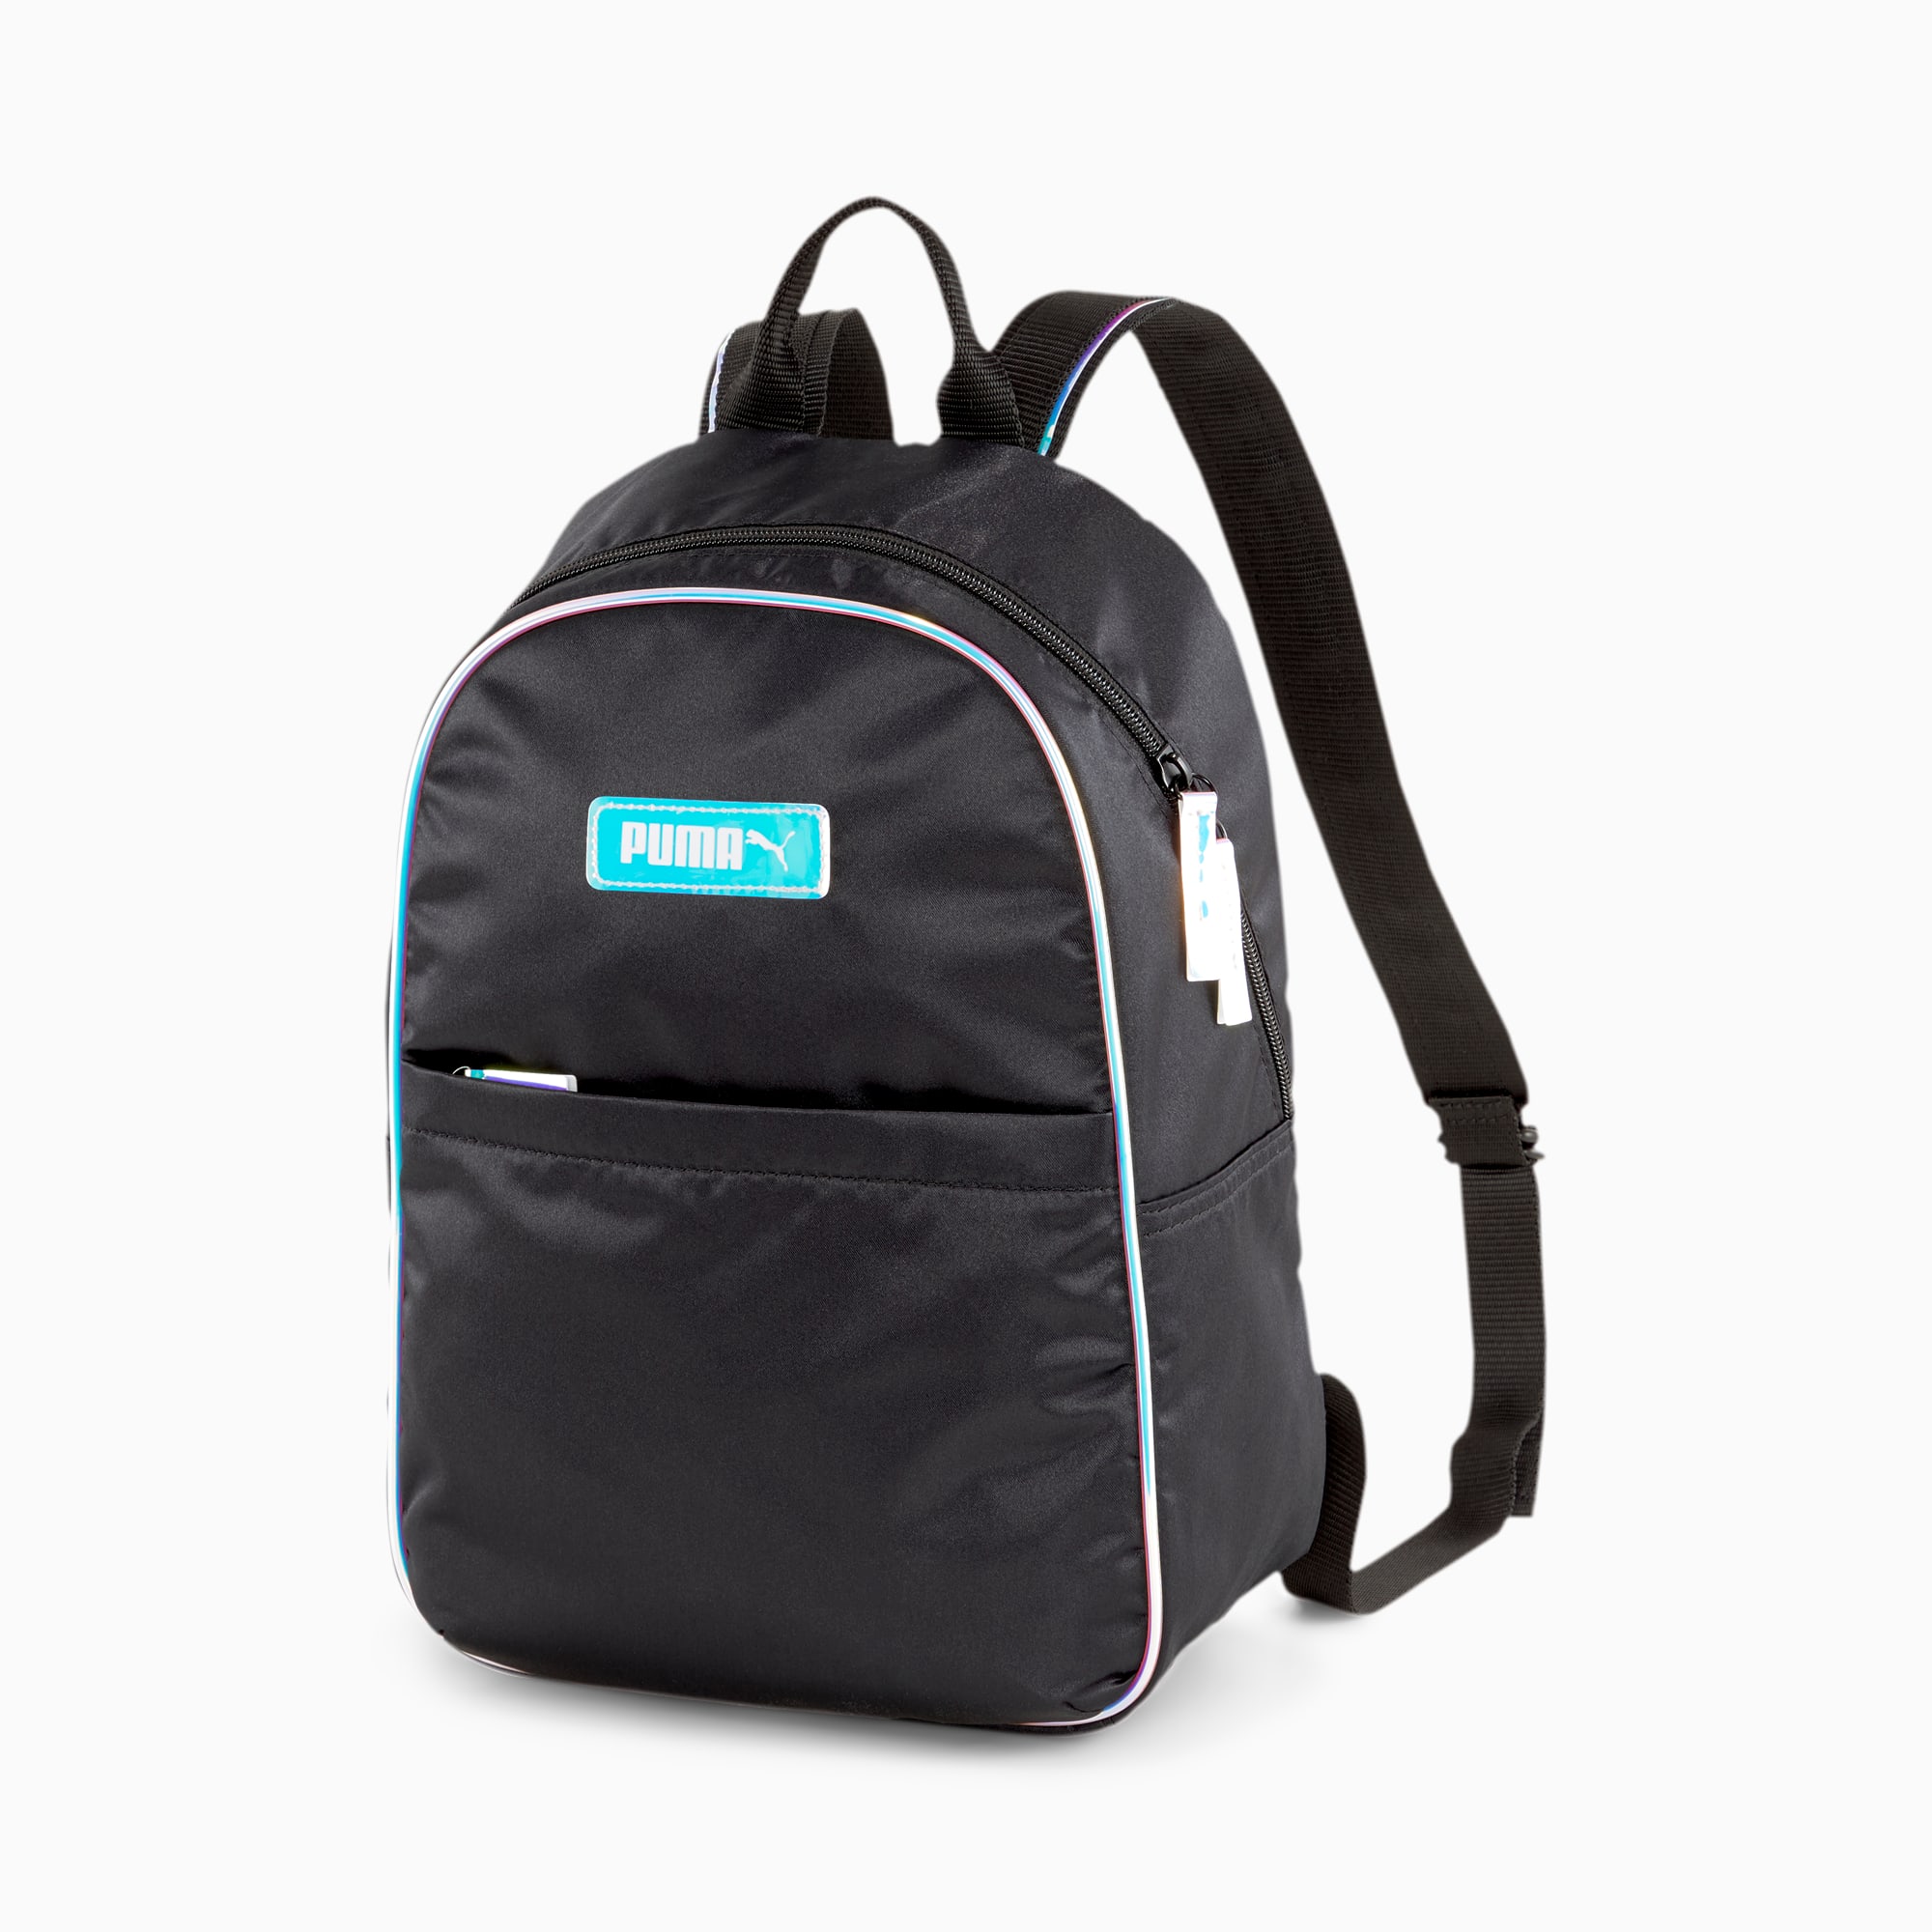 Prime Time Women's Backpack